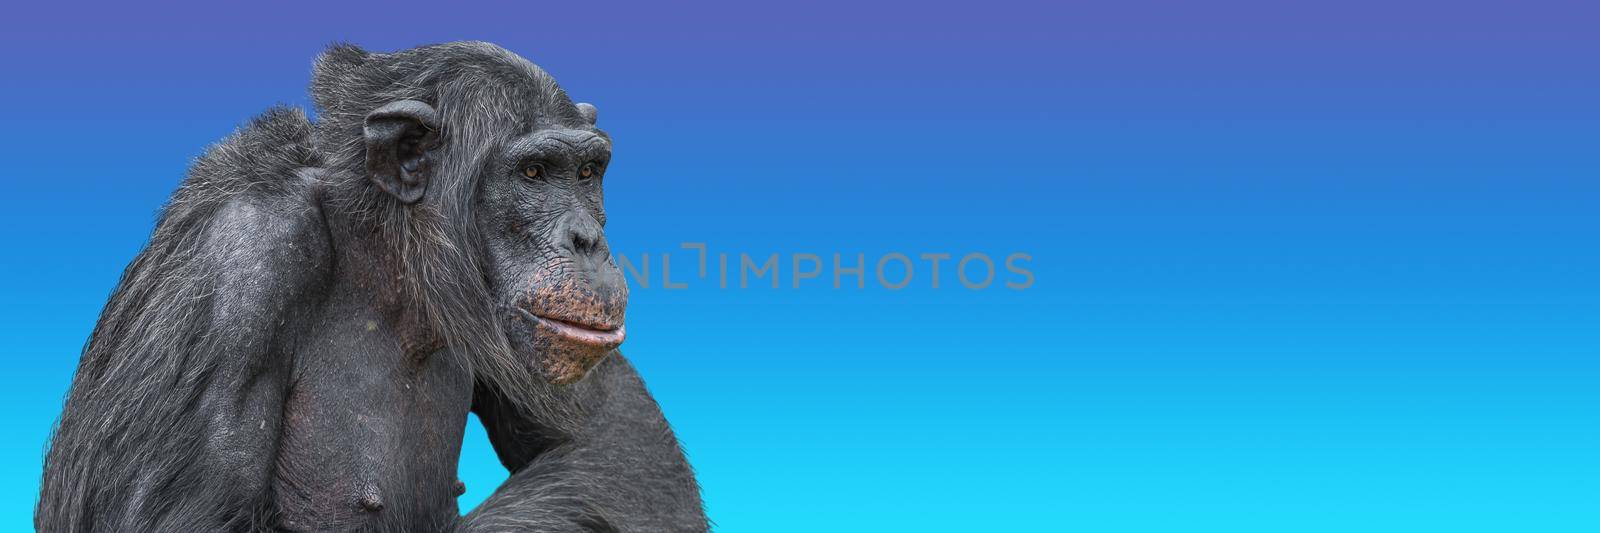 Banner with portrait of serious thinking chimpanzee at blue sky background with copy space for text. Concept animal diversity and wildlife conservation. by neurobite